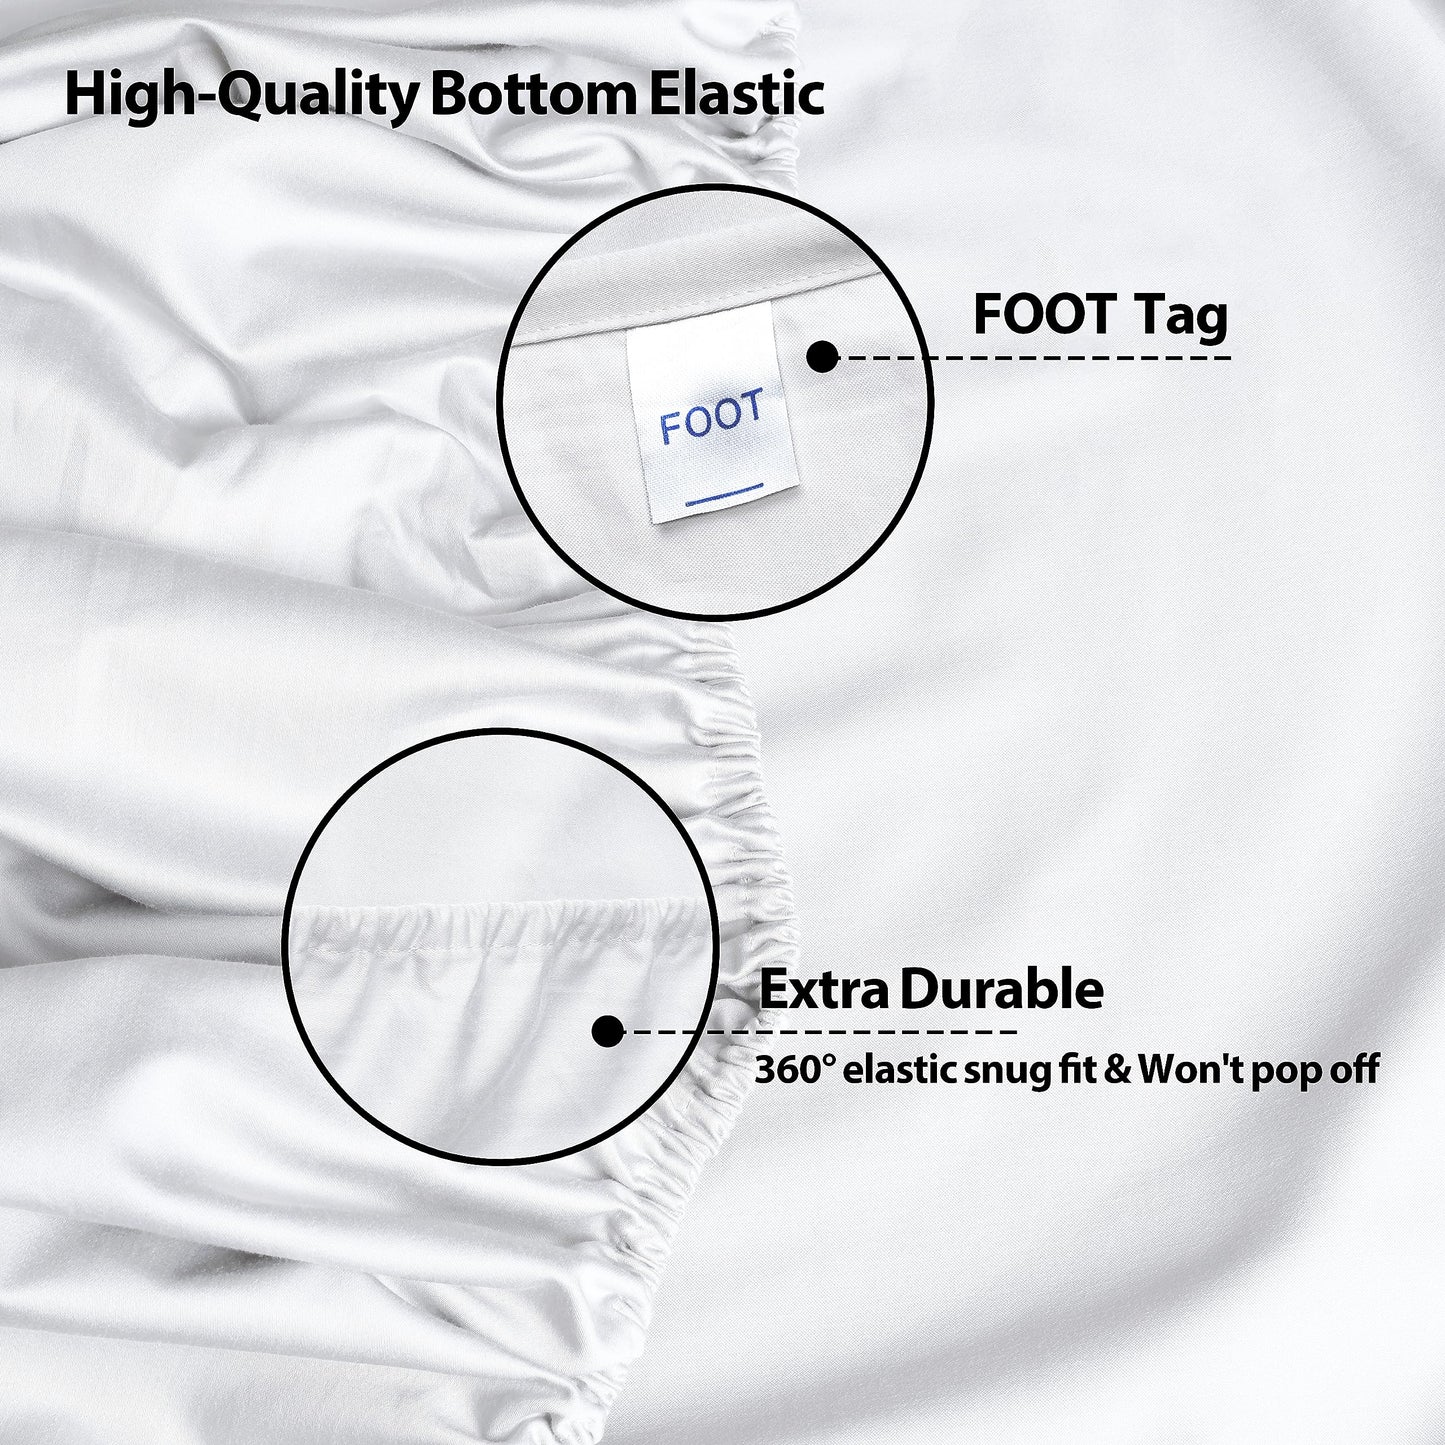 2-Pack Pure Cotton Twin XL Fitted Sheet for Adjustable Bed Split King, 600 TC 16" Deep Pocket Egyptian Cotton Fitted Sheet (2pcs, Twin XL, White)